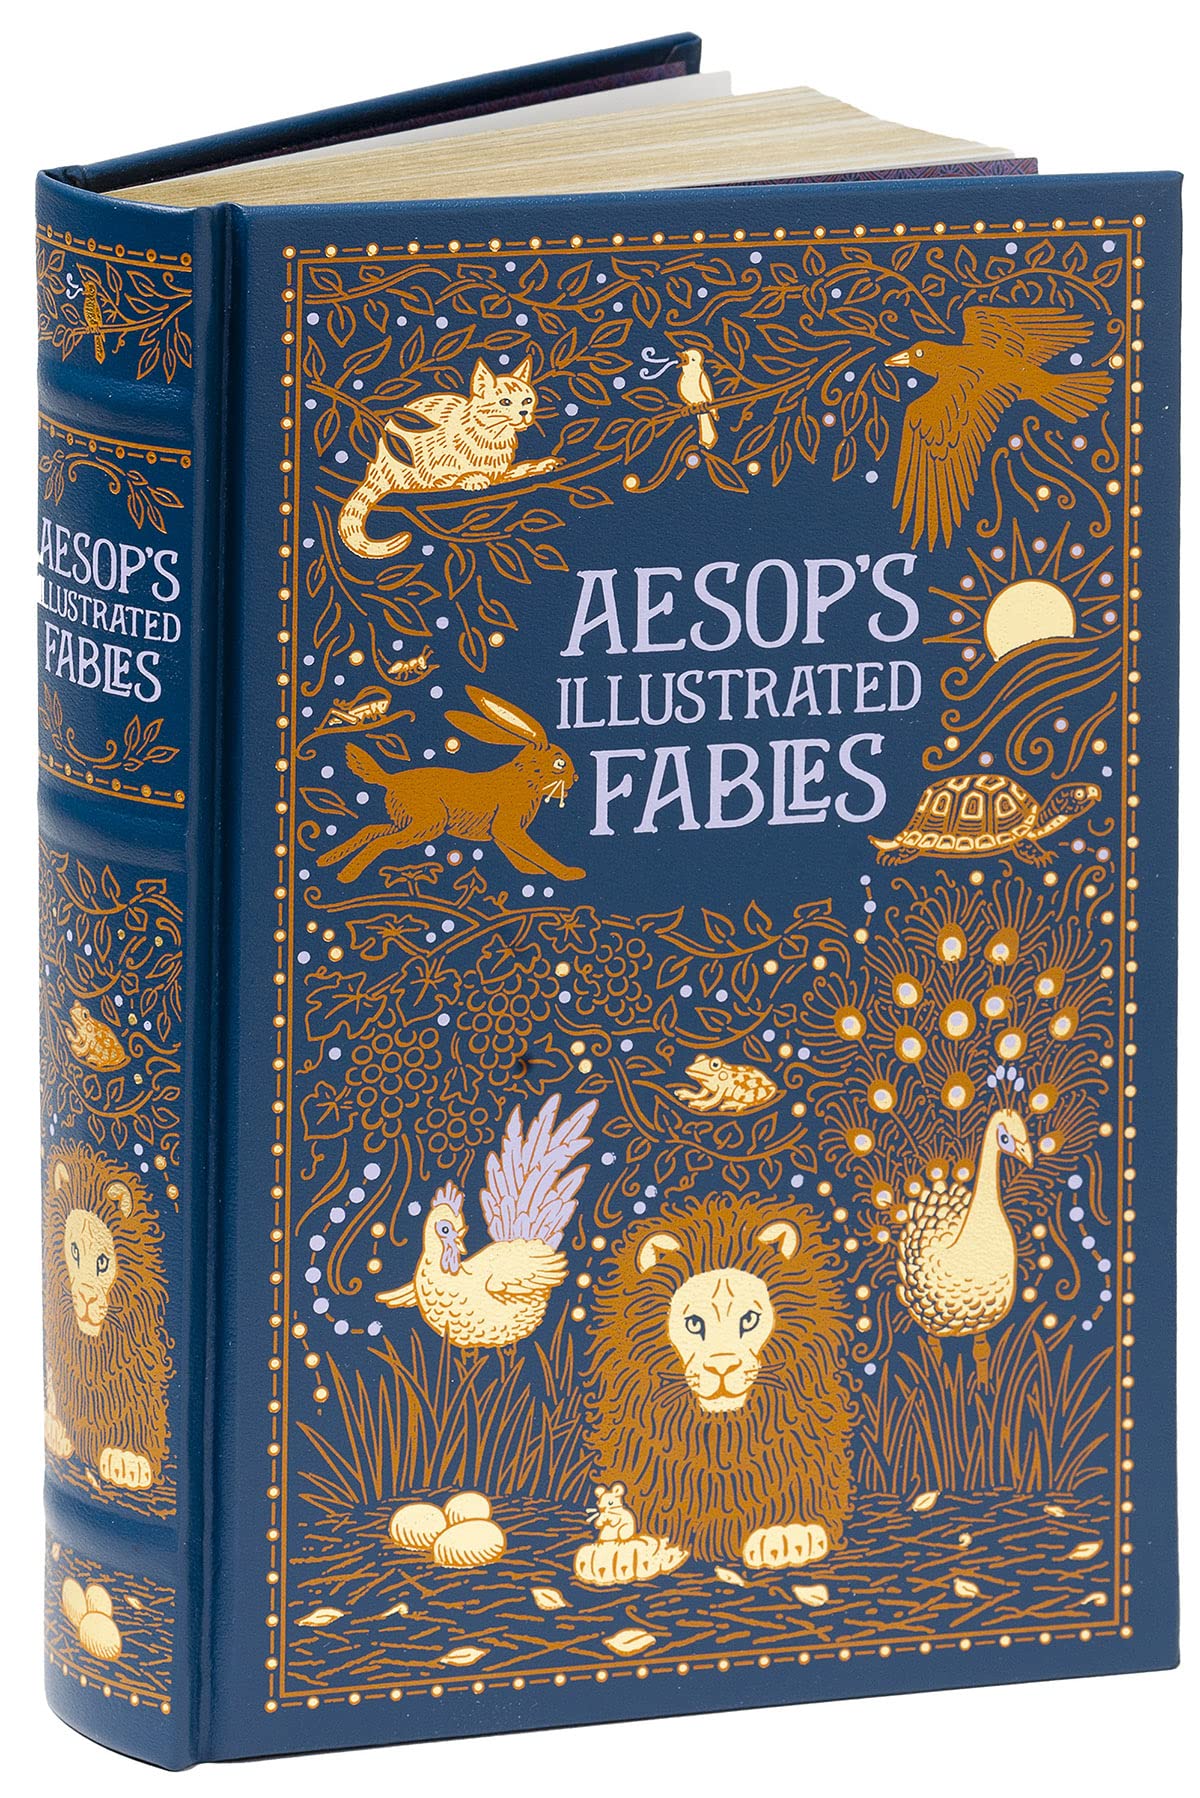 Aesops Illustrated Fables (Leatherbound Classic Collection) by Aesop (2013) Leather Bound $26